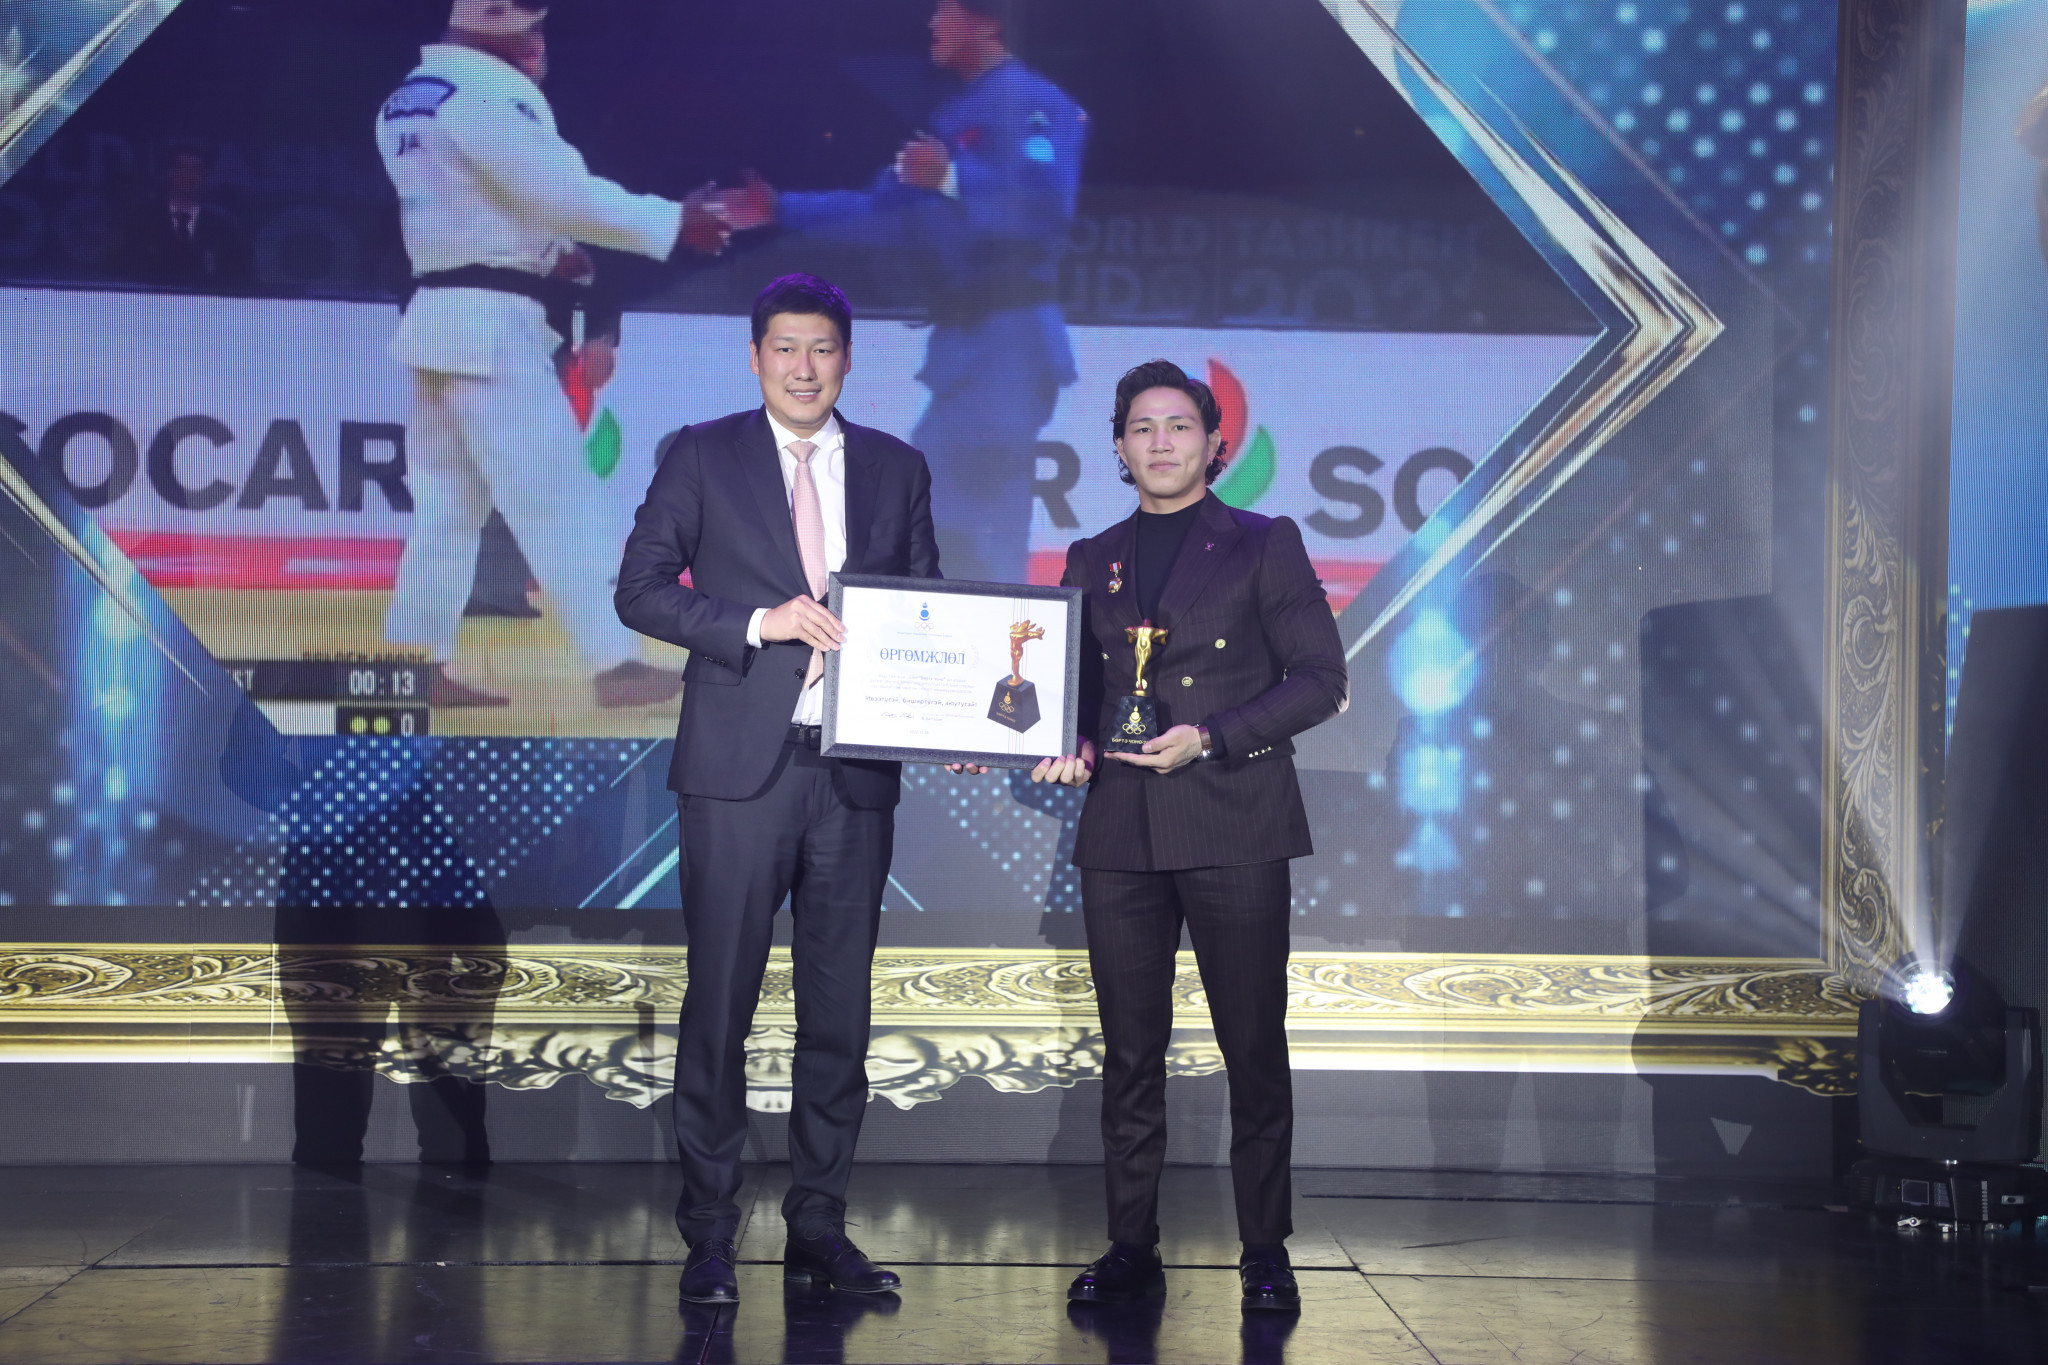 Best in sport recognised by Mongolia NOC at Burte Chono awards